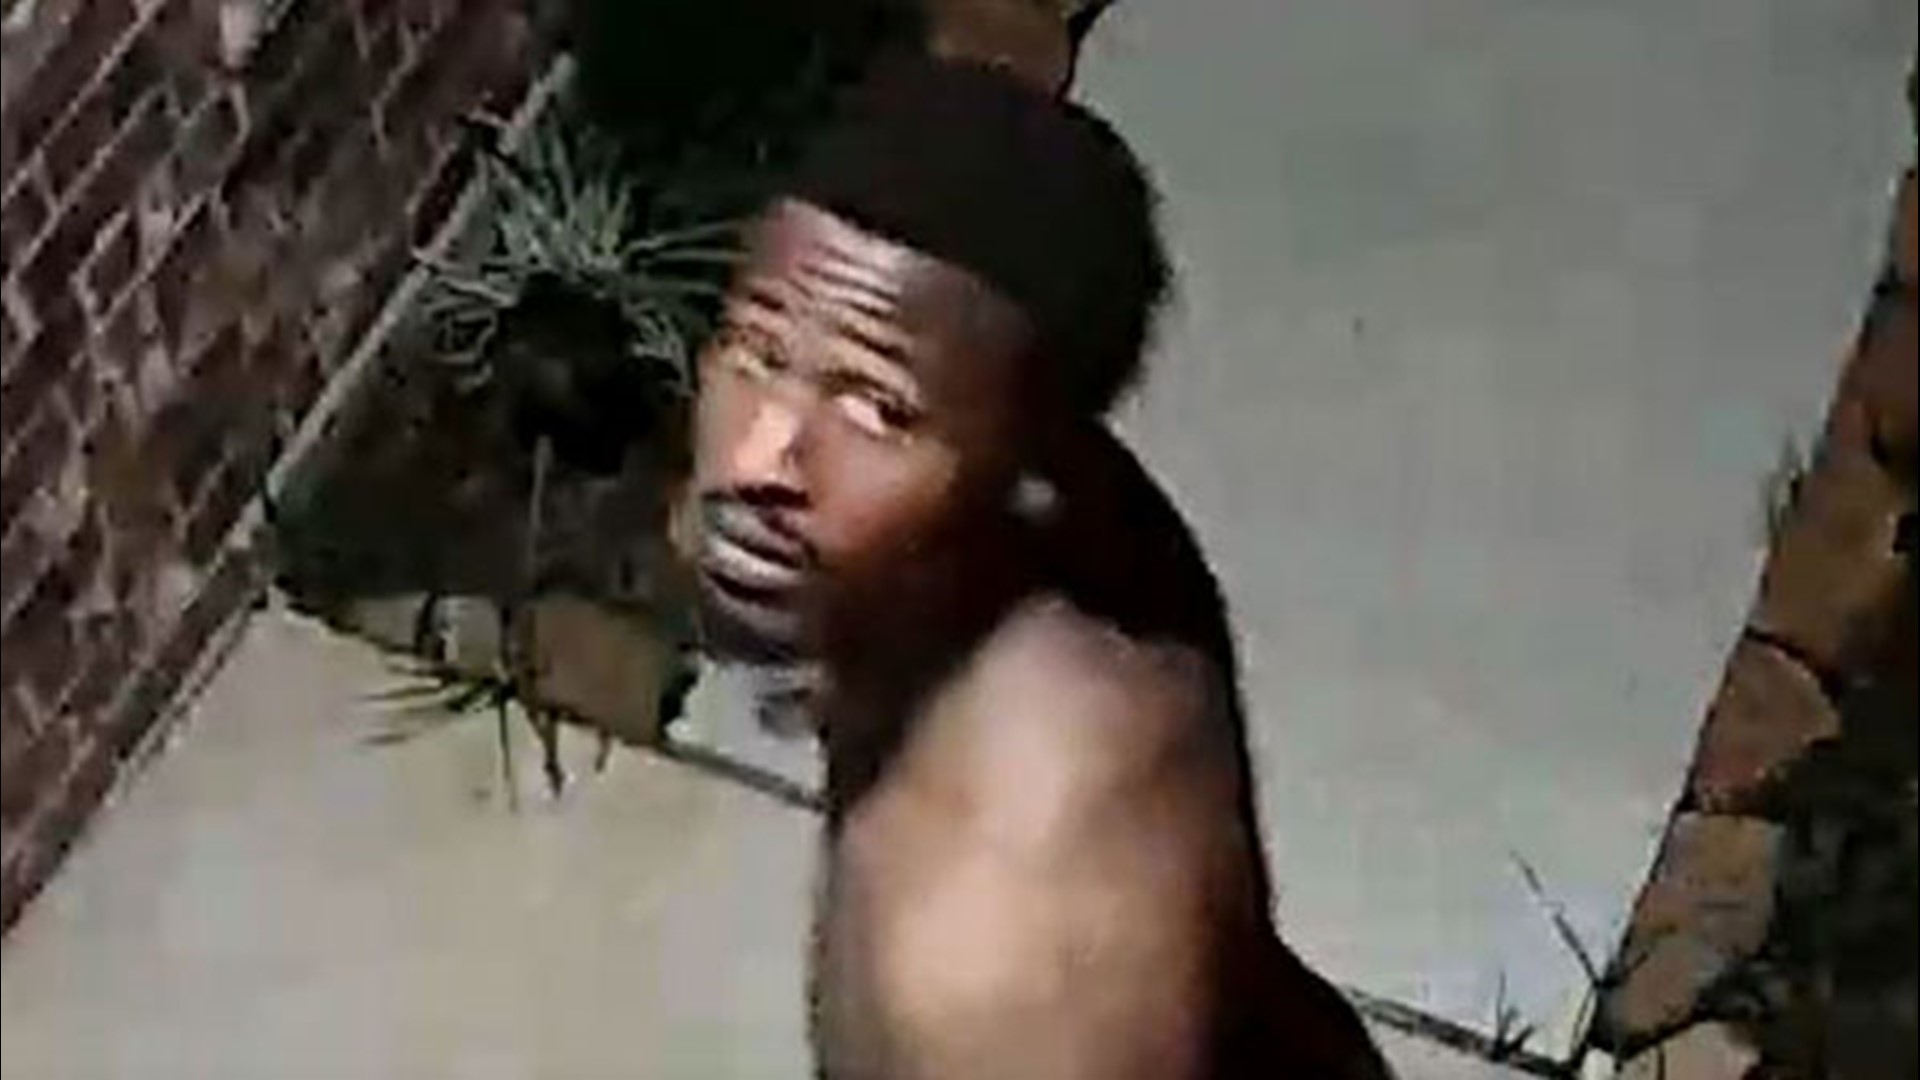 Investigators were looking for a suspicious person who was caught on camera in the buff